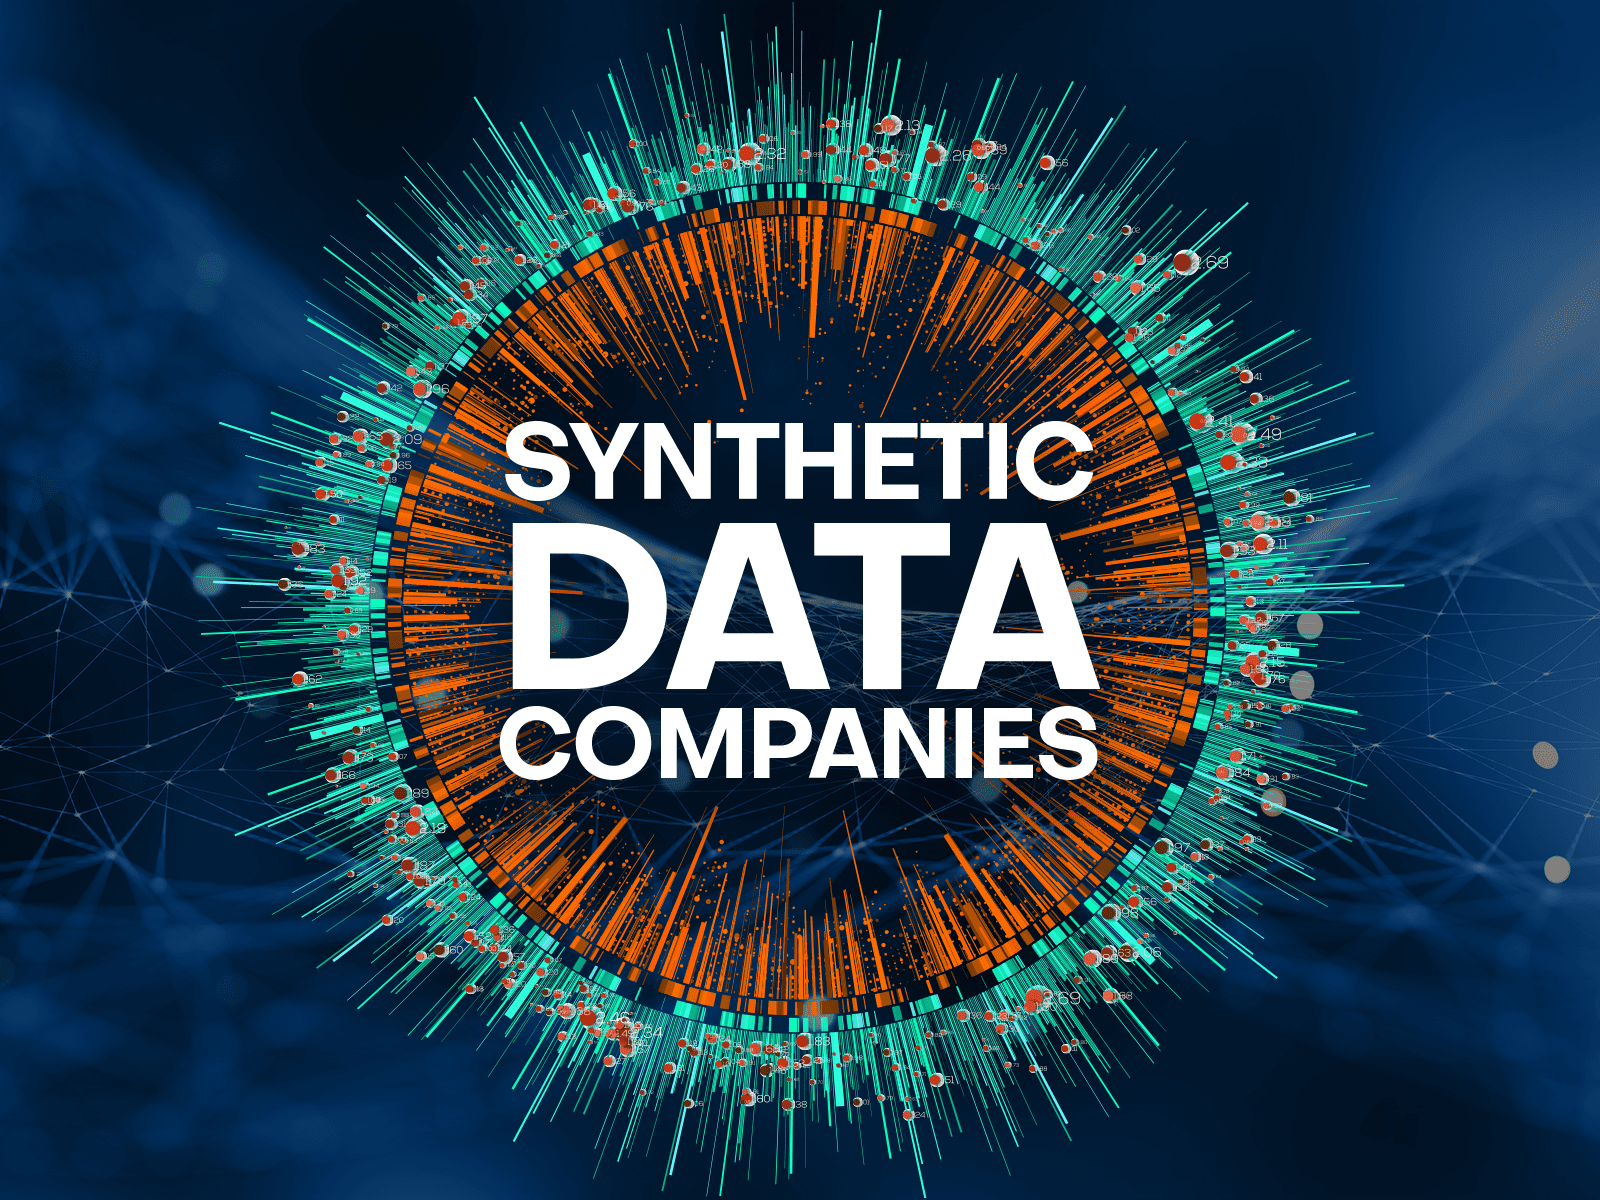 Synthetic data companies